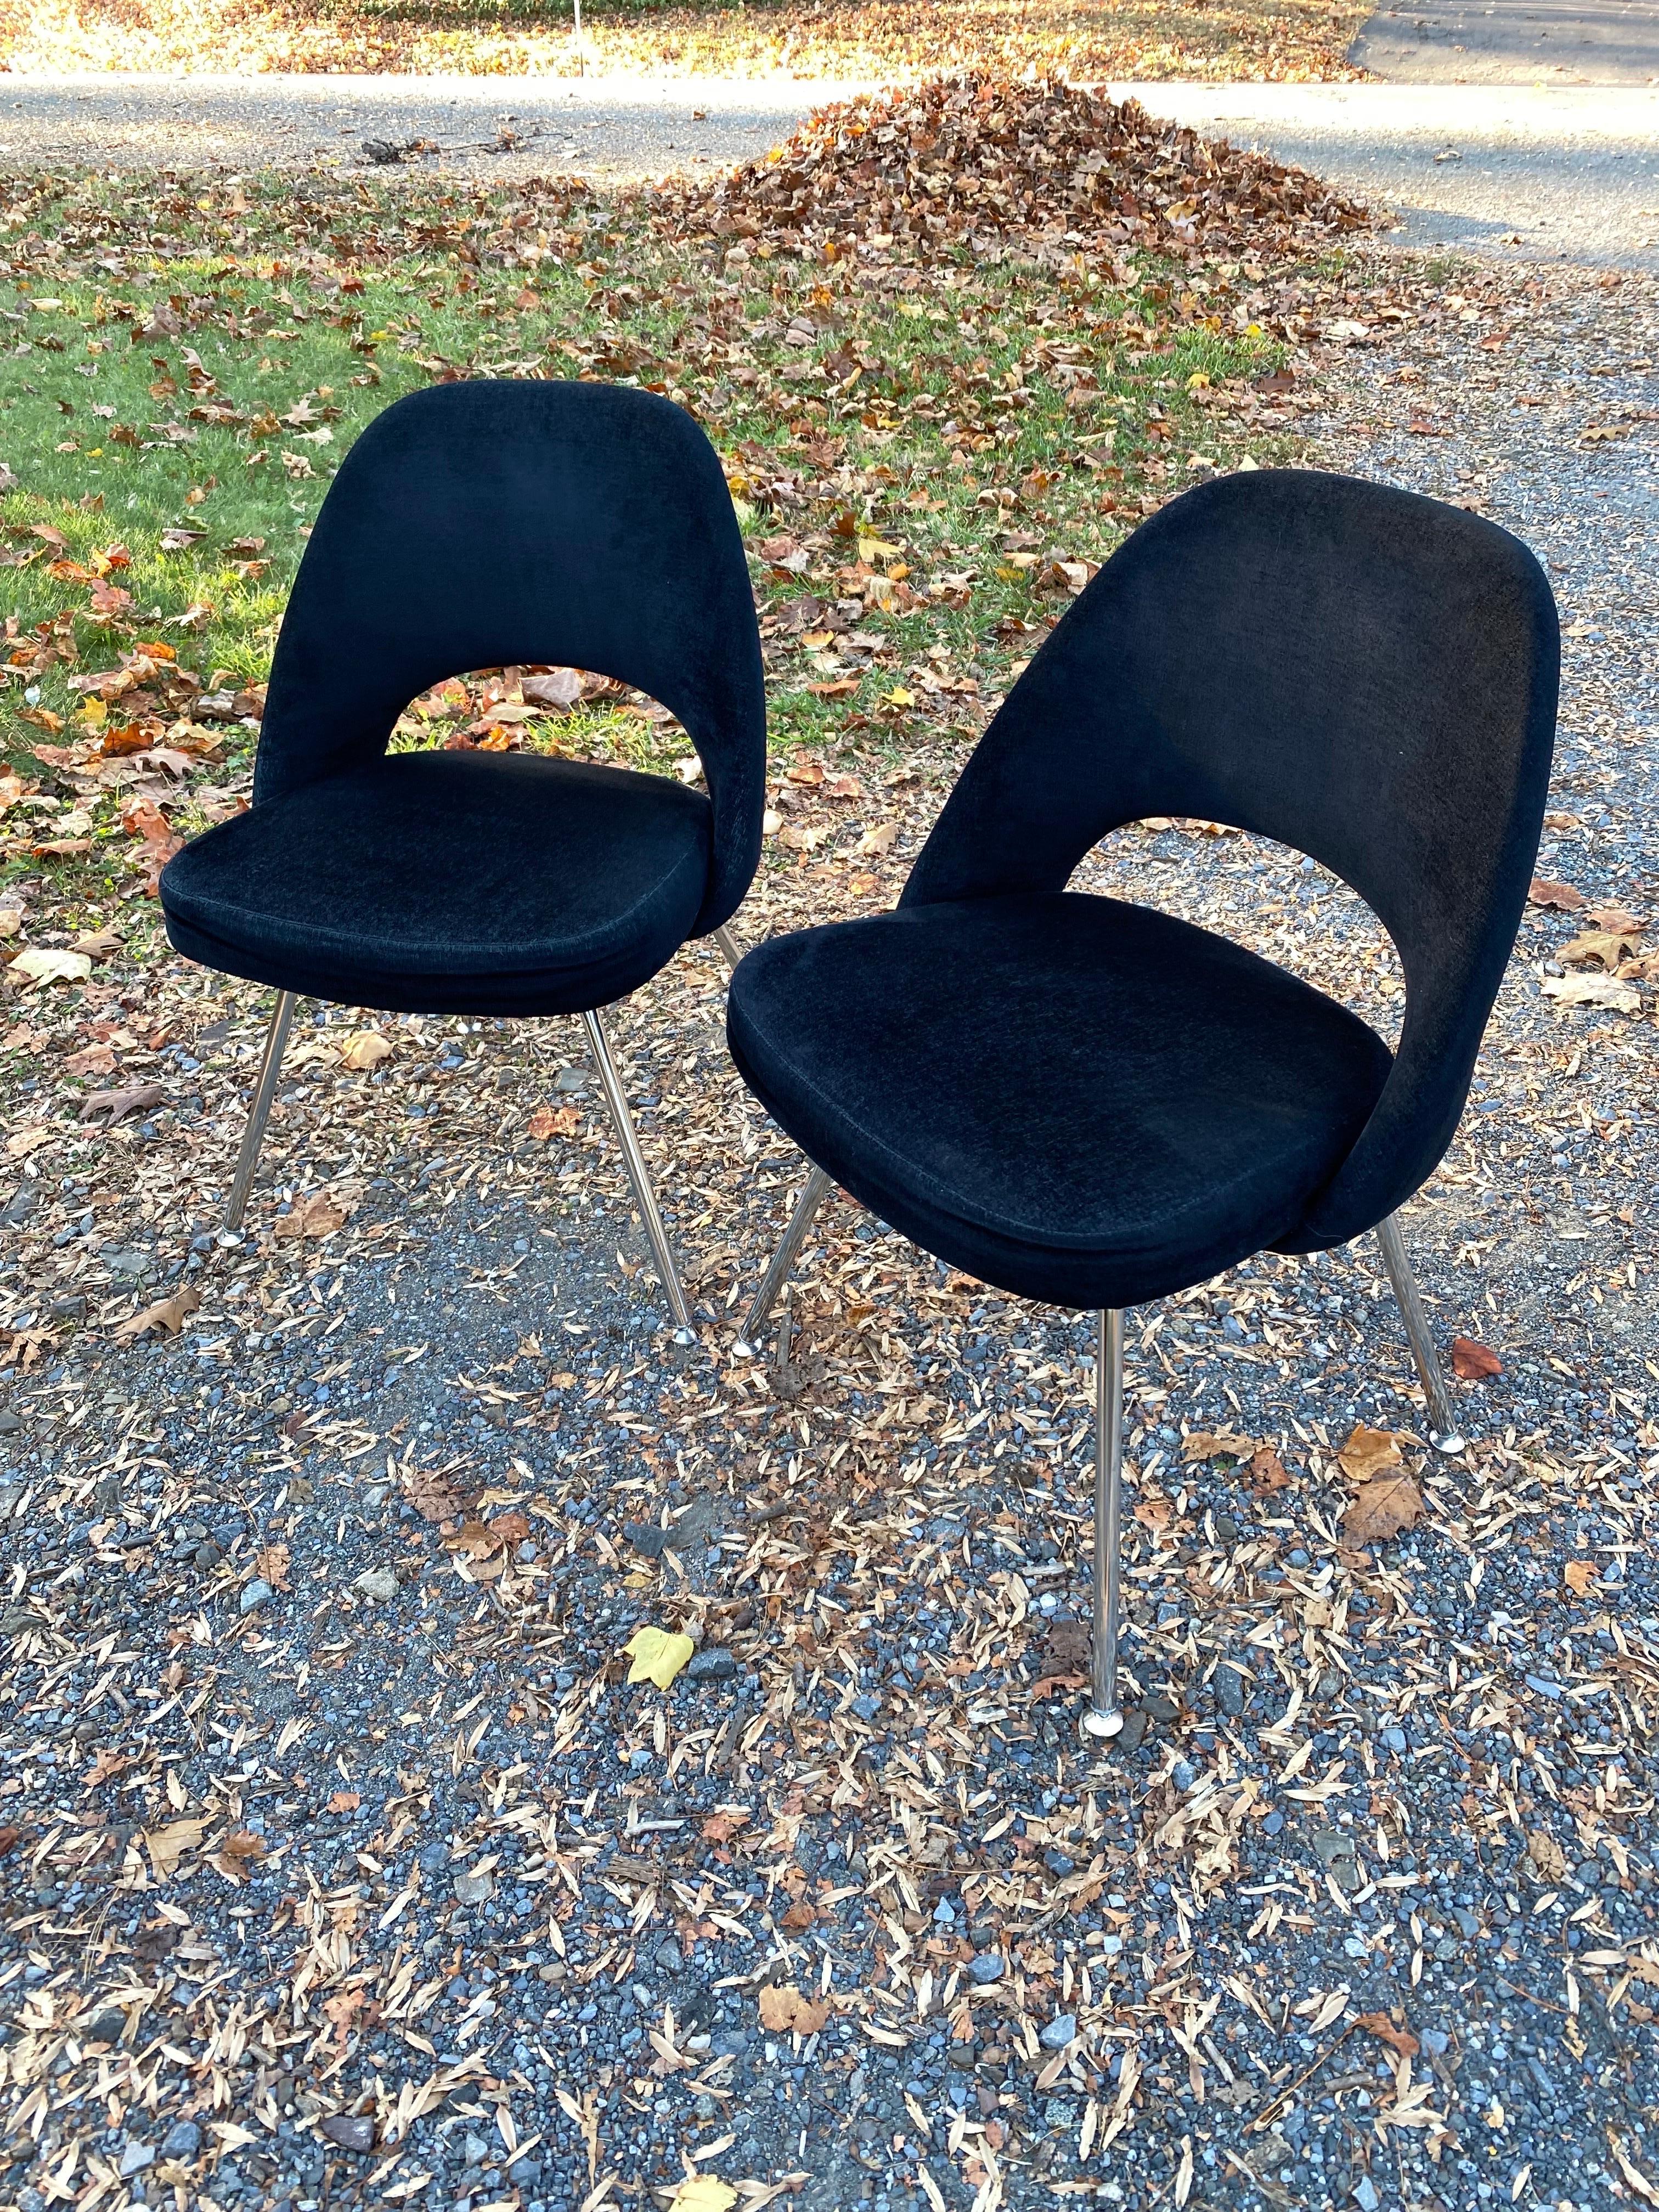 Set of 8 Eero Saarinen Armless Dining Chairs for Knoll. This set dates to 2009.  Black velvet material in very nice condition!  Chrome is clean as well!  Chairs ready to go!  One of the most comfortable chairs out there!  I use these around my